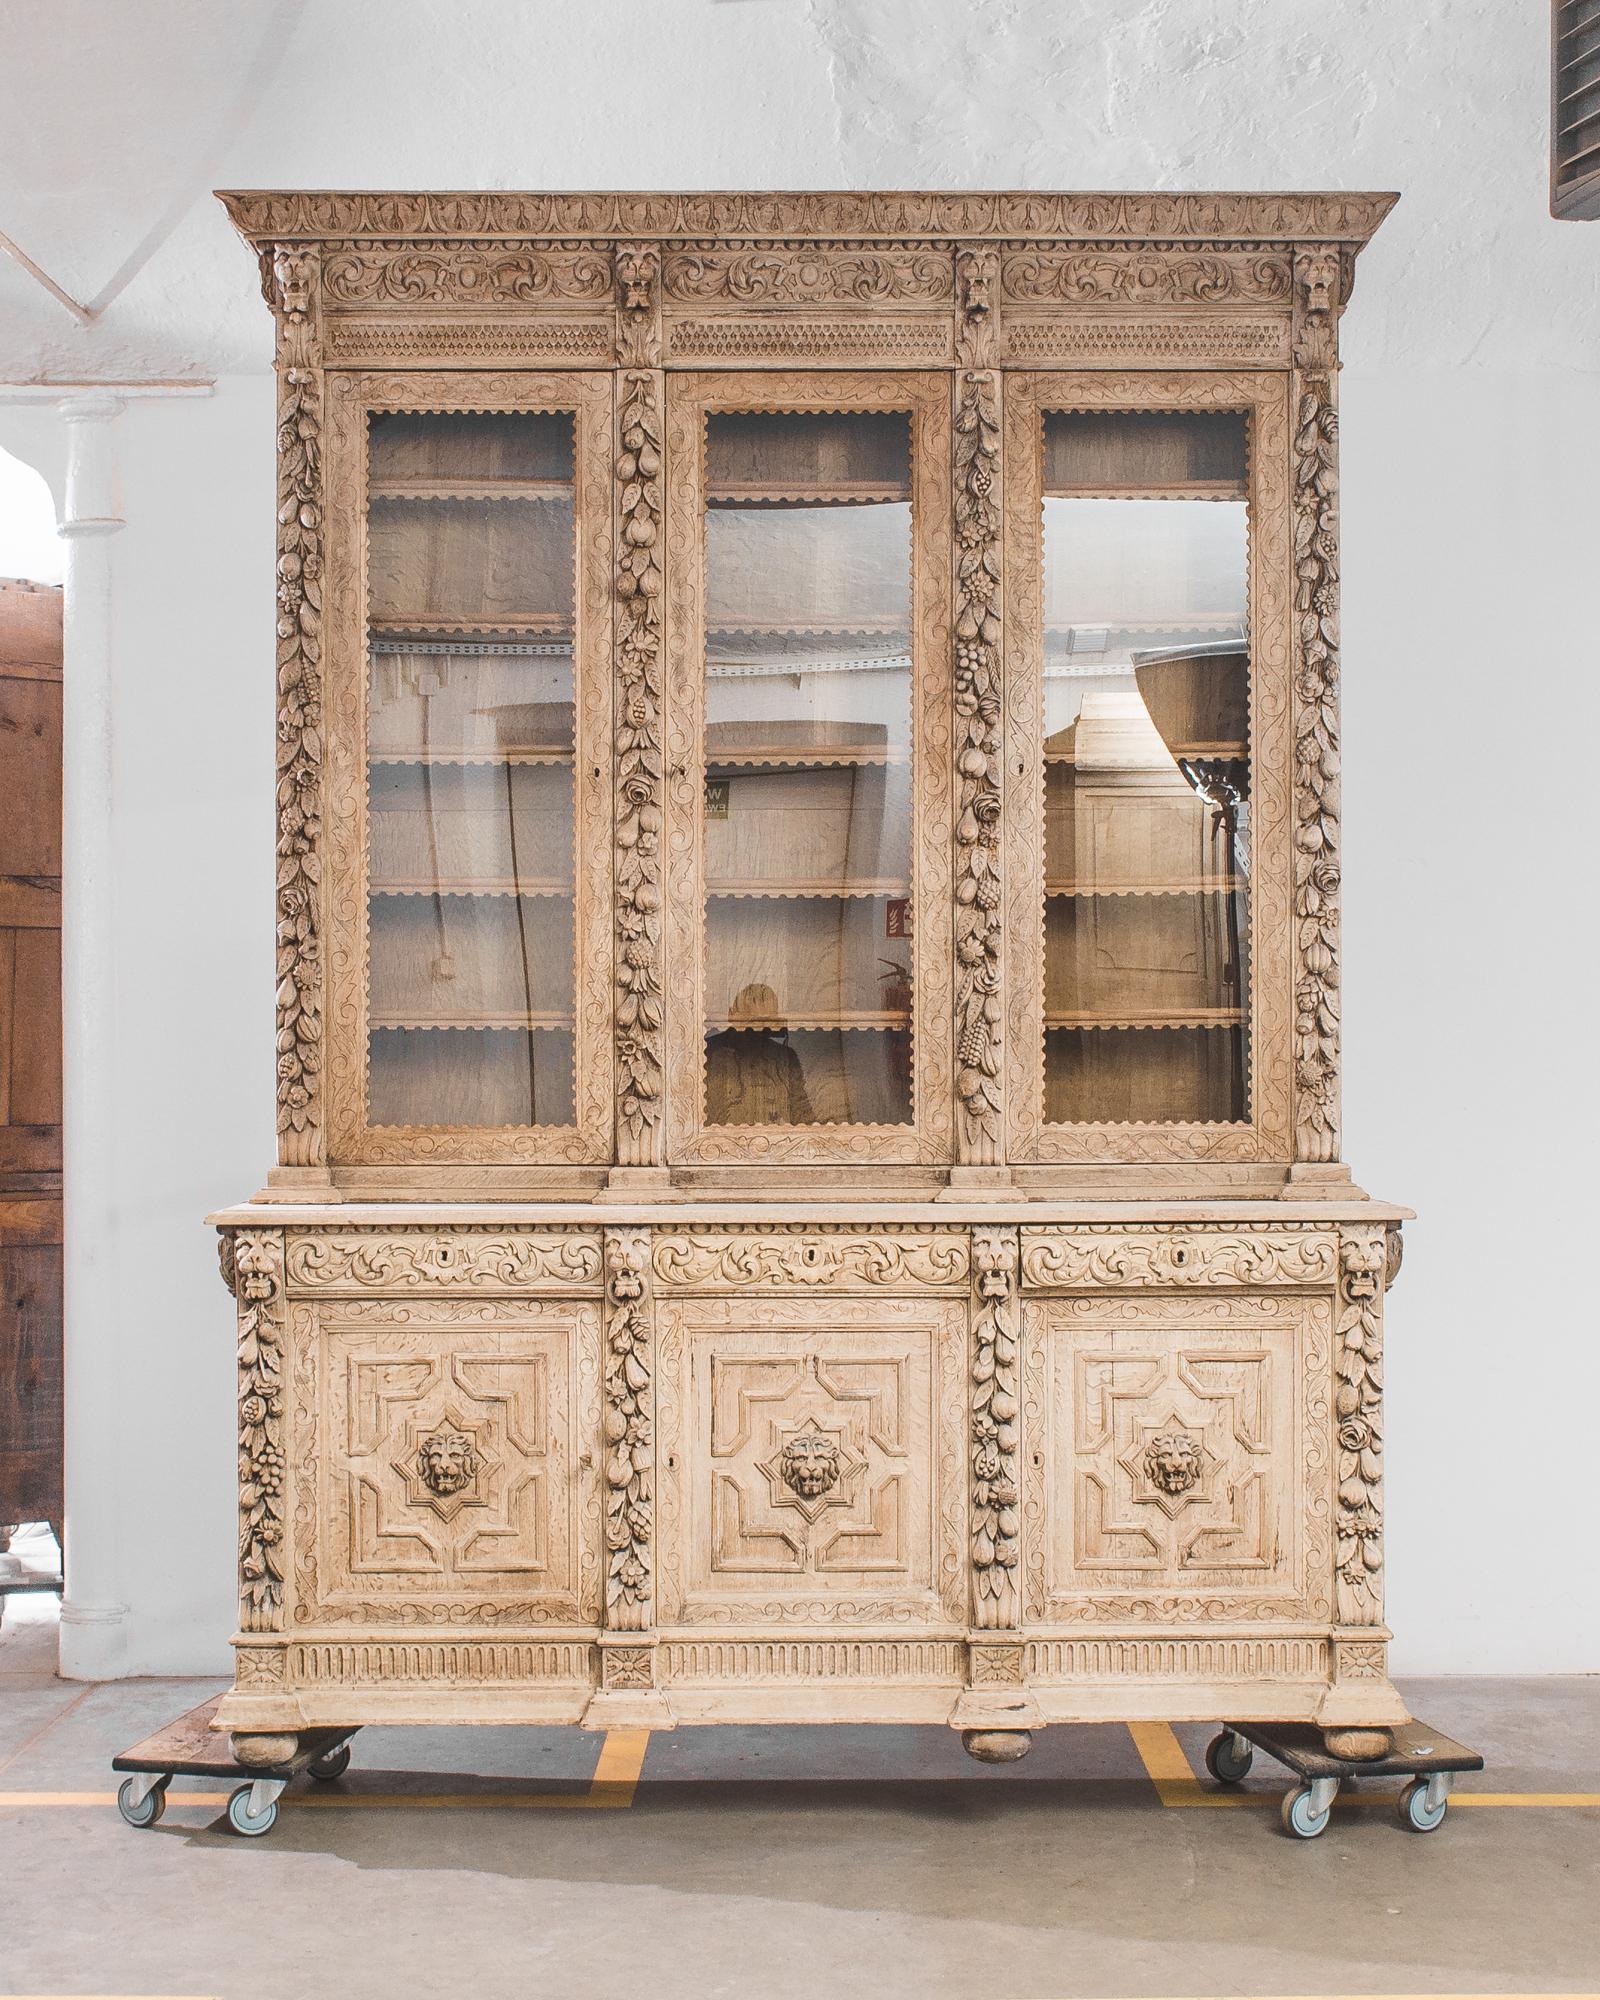 This bleached oak cabinet from 1880, France is composed of a tall vitrine and a large three doors buffet. The stately frame is decorated with extravagant engravings of a variety of grotesque figures, as exotic fruits or lion heads. A scalloped frame